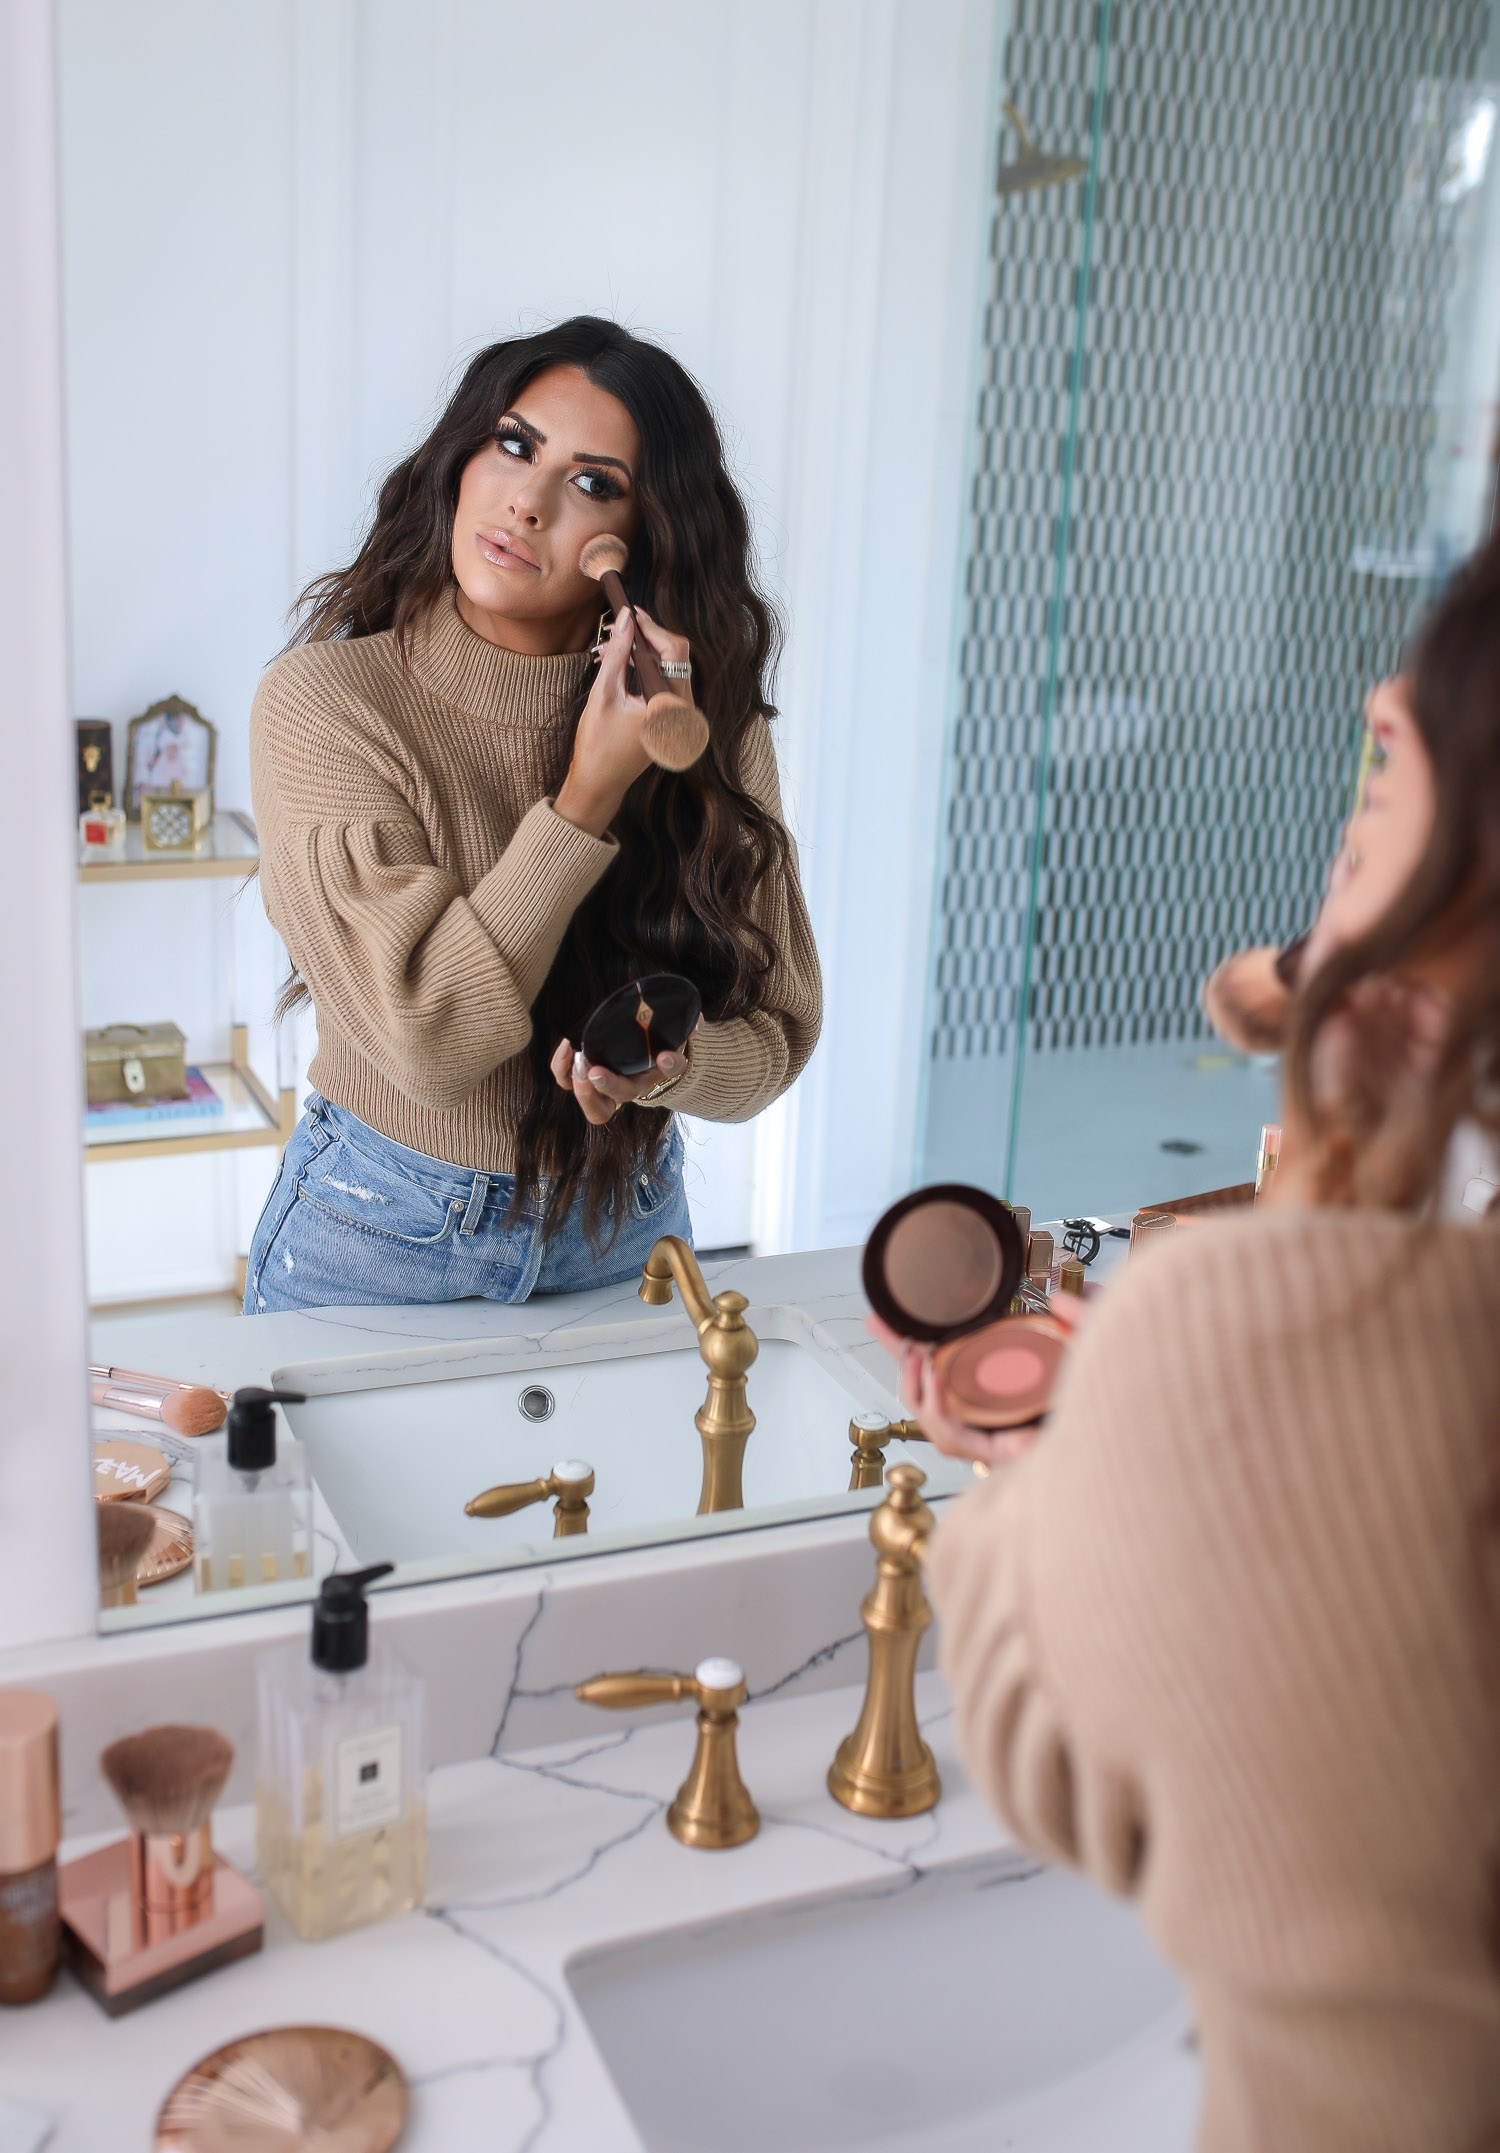 Sephora savings event fall 2020, beauty blogger sephora favorites fall 2020, emily ann gemma |Sephora Beauty Insider Sale by popular US beauty blog, The Sweetest Thing: image of Emily Gemma wearing a puff sleeve turtleneck sweater, Rolex watch, high waist distressed jeans and applying Sephora bronzer in her bathroom mirror. 